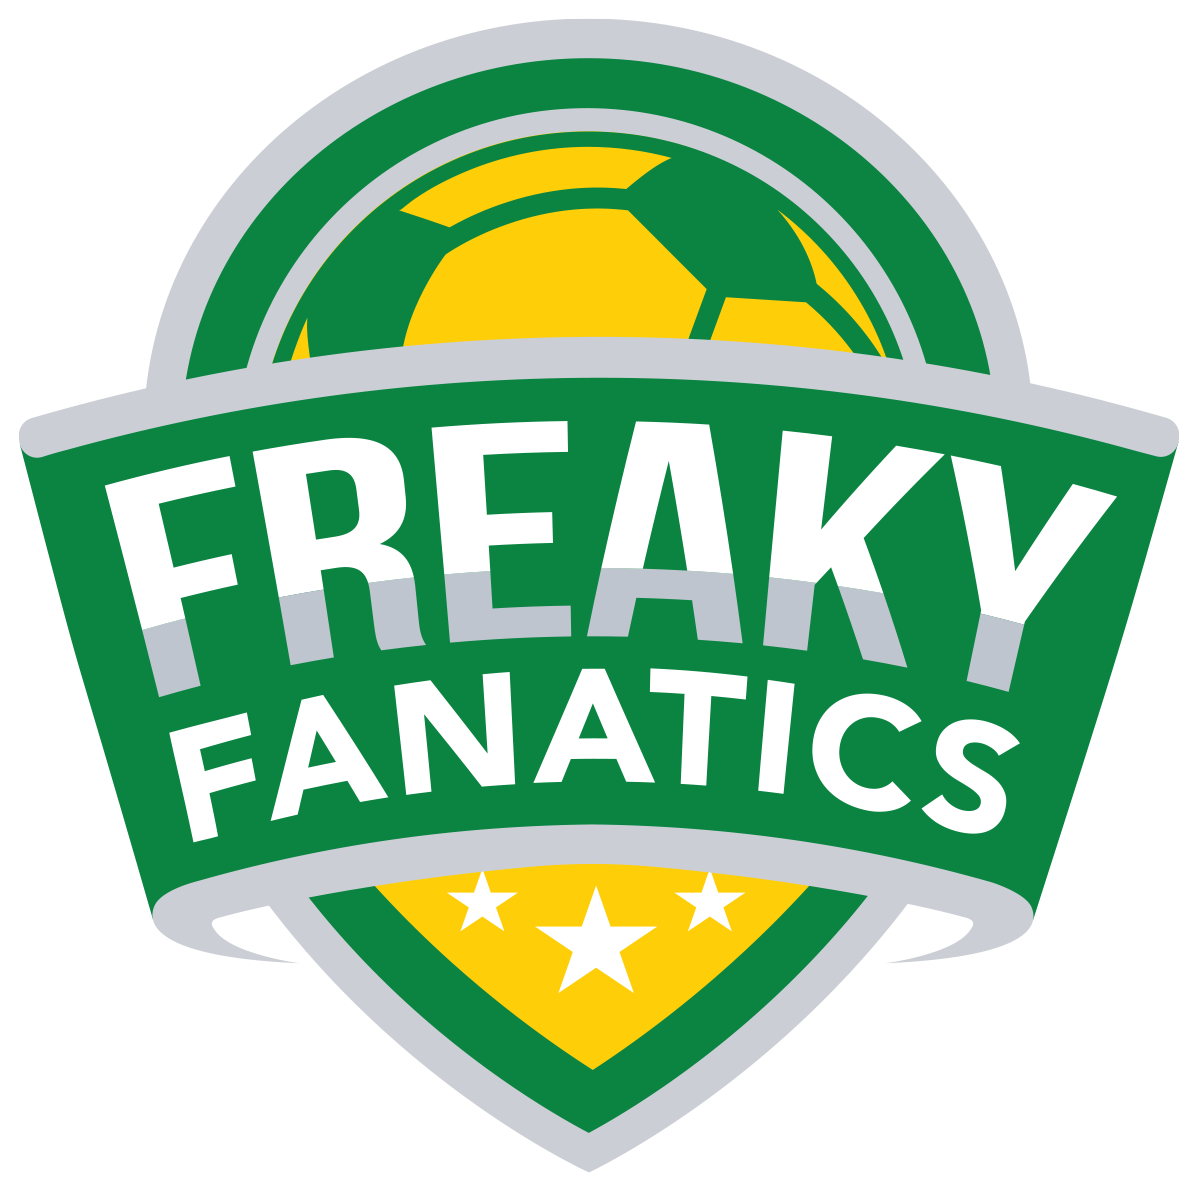 Freaky Fanatics Quirky Sports Fan Clothing and Shoes